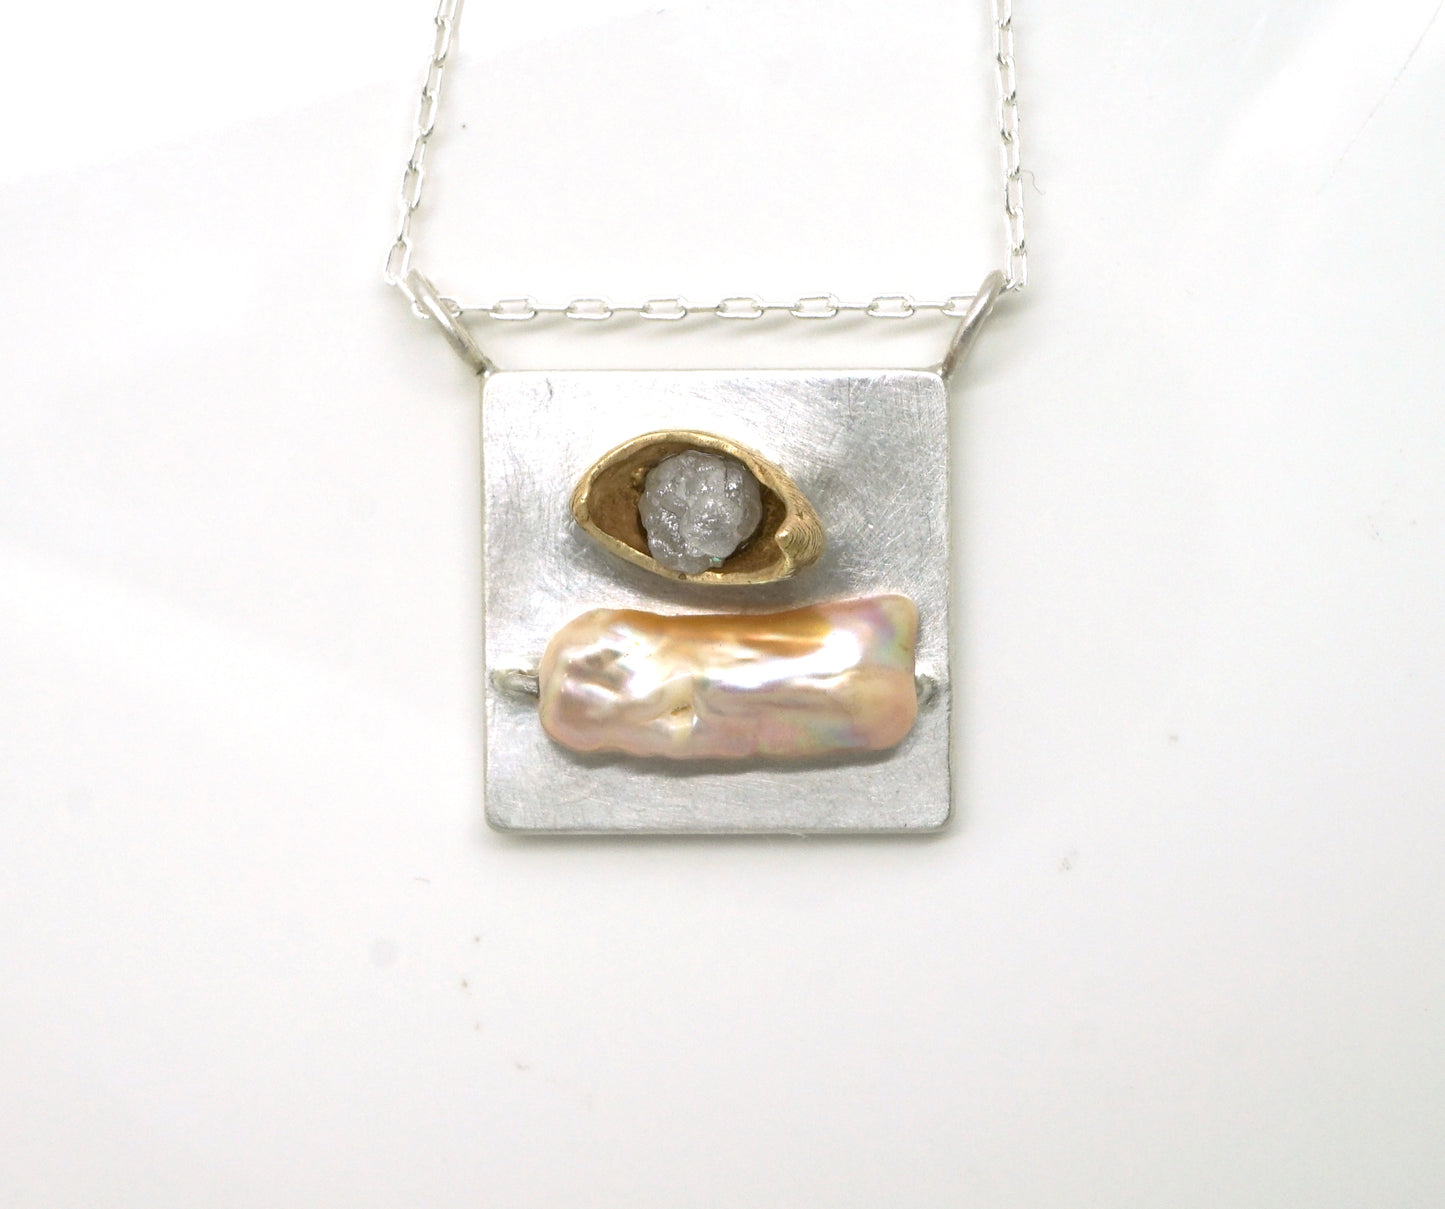 Art pendant necklace with raw diamond and pearl